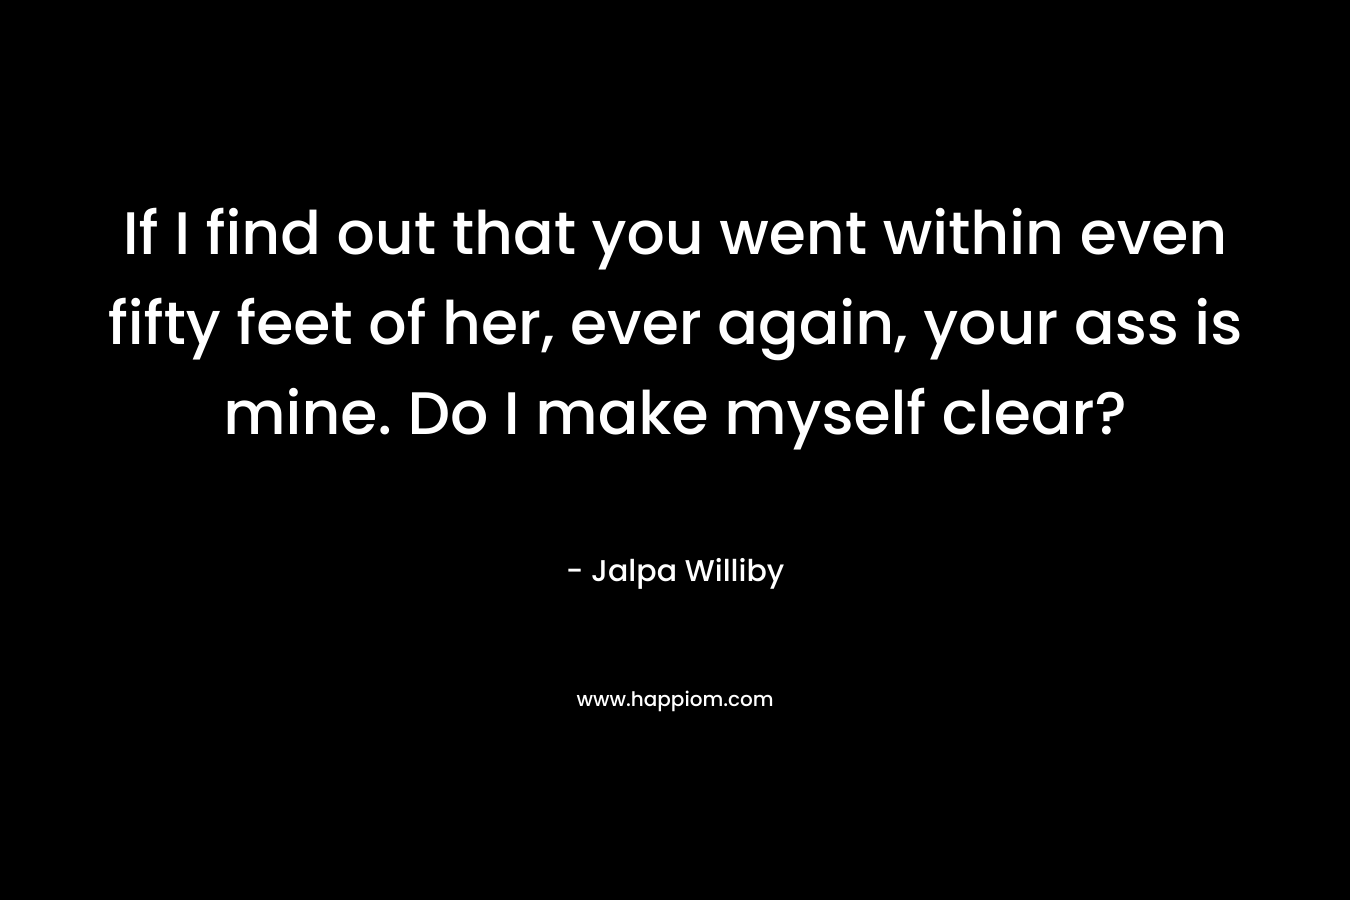 If I find out that you went within even fifty feet of her, ever again, your ass is mine. Do I make myself clear? – Jalpa Williby